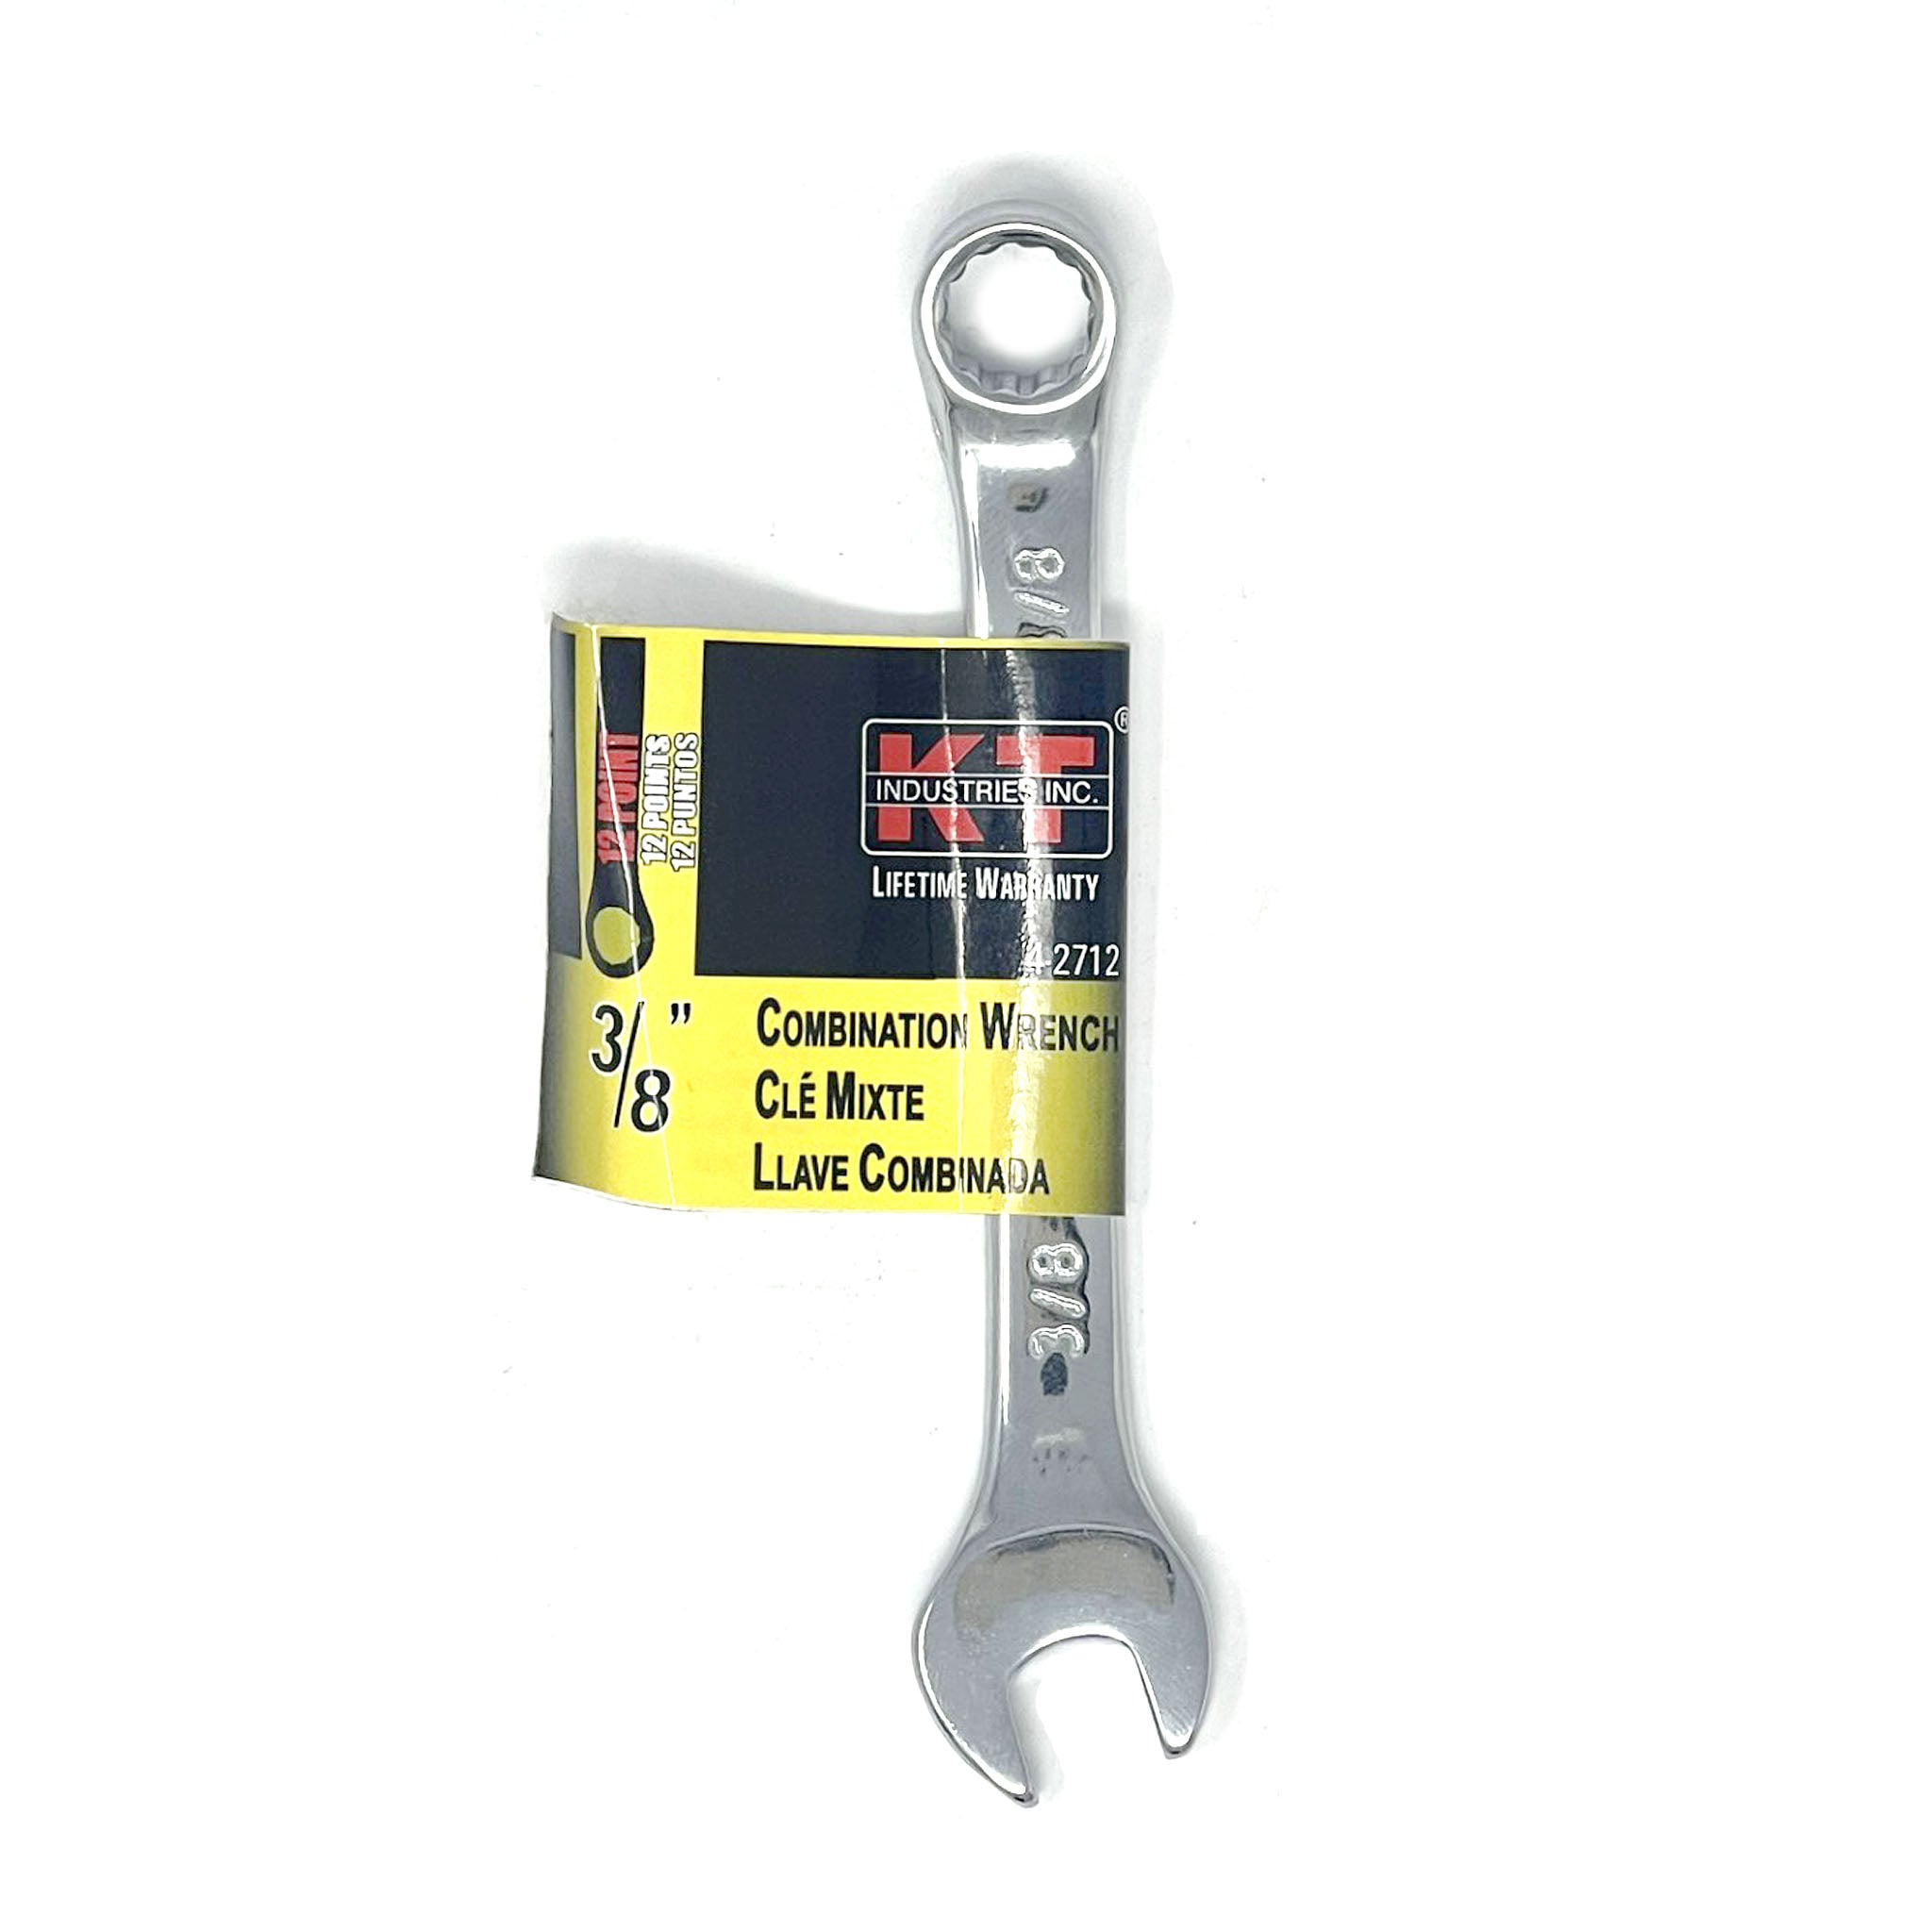 Combination Wrench - 3/8"